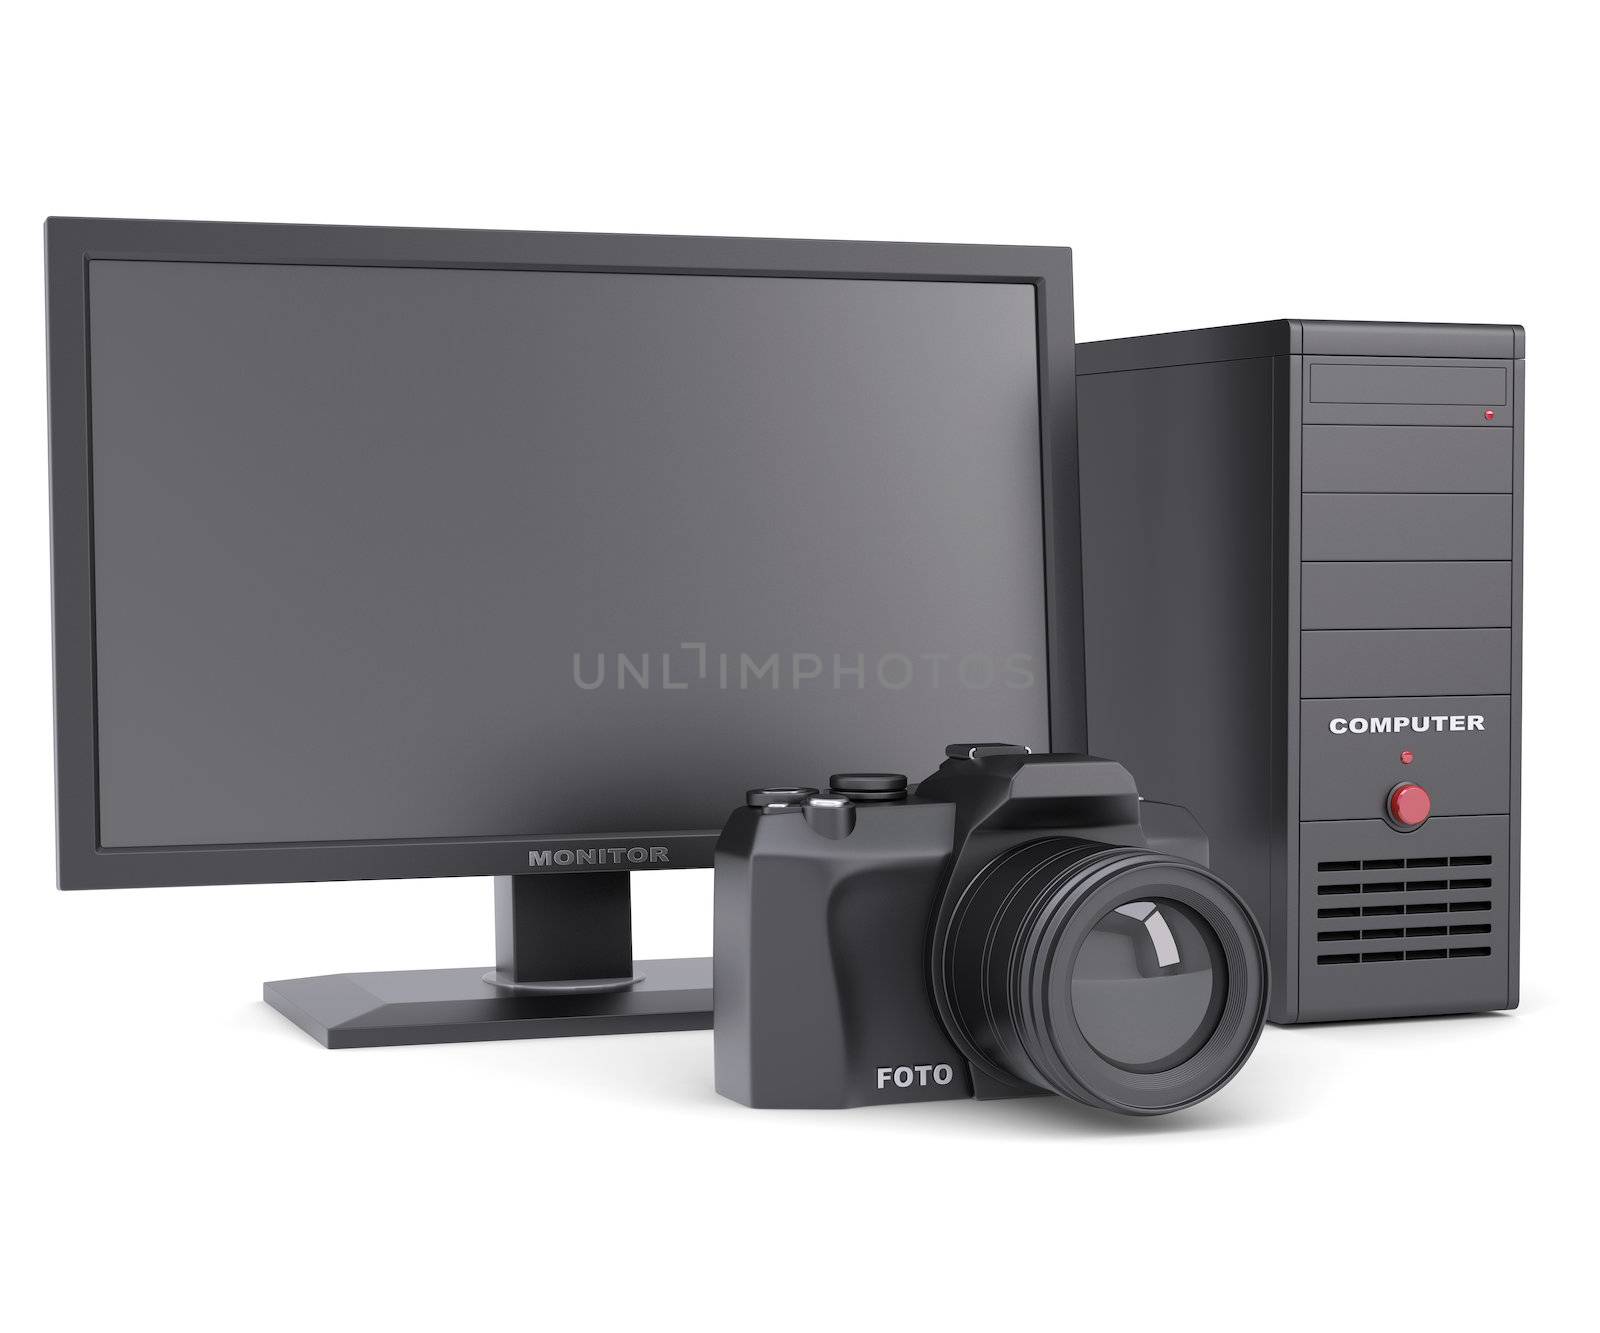 The system unit, monitor and camera by cherezoff